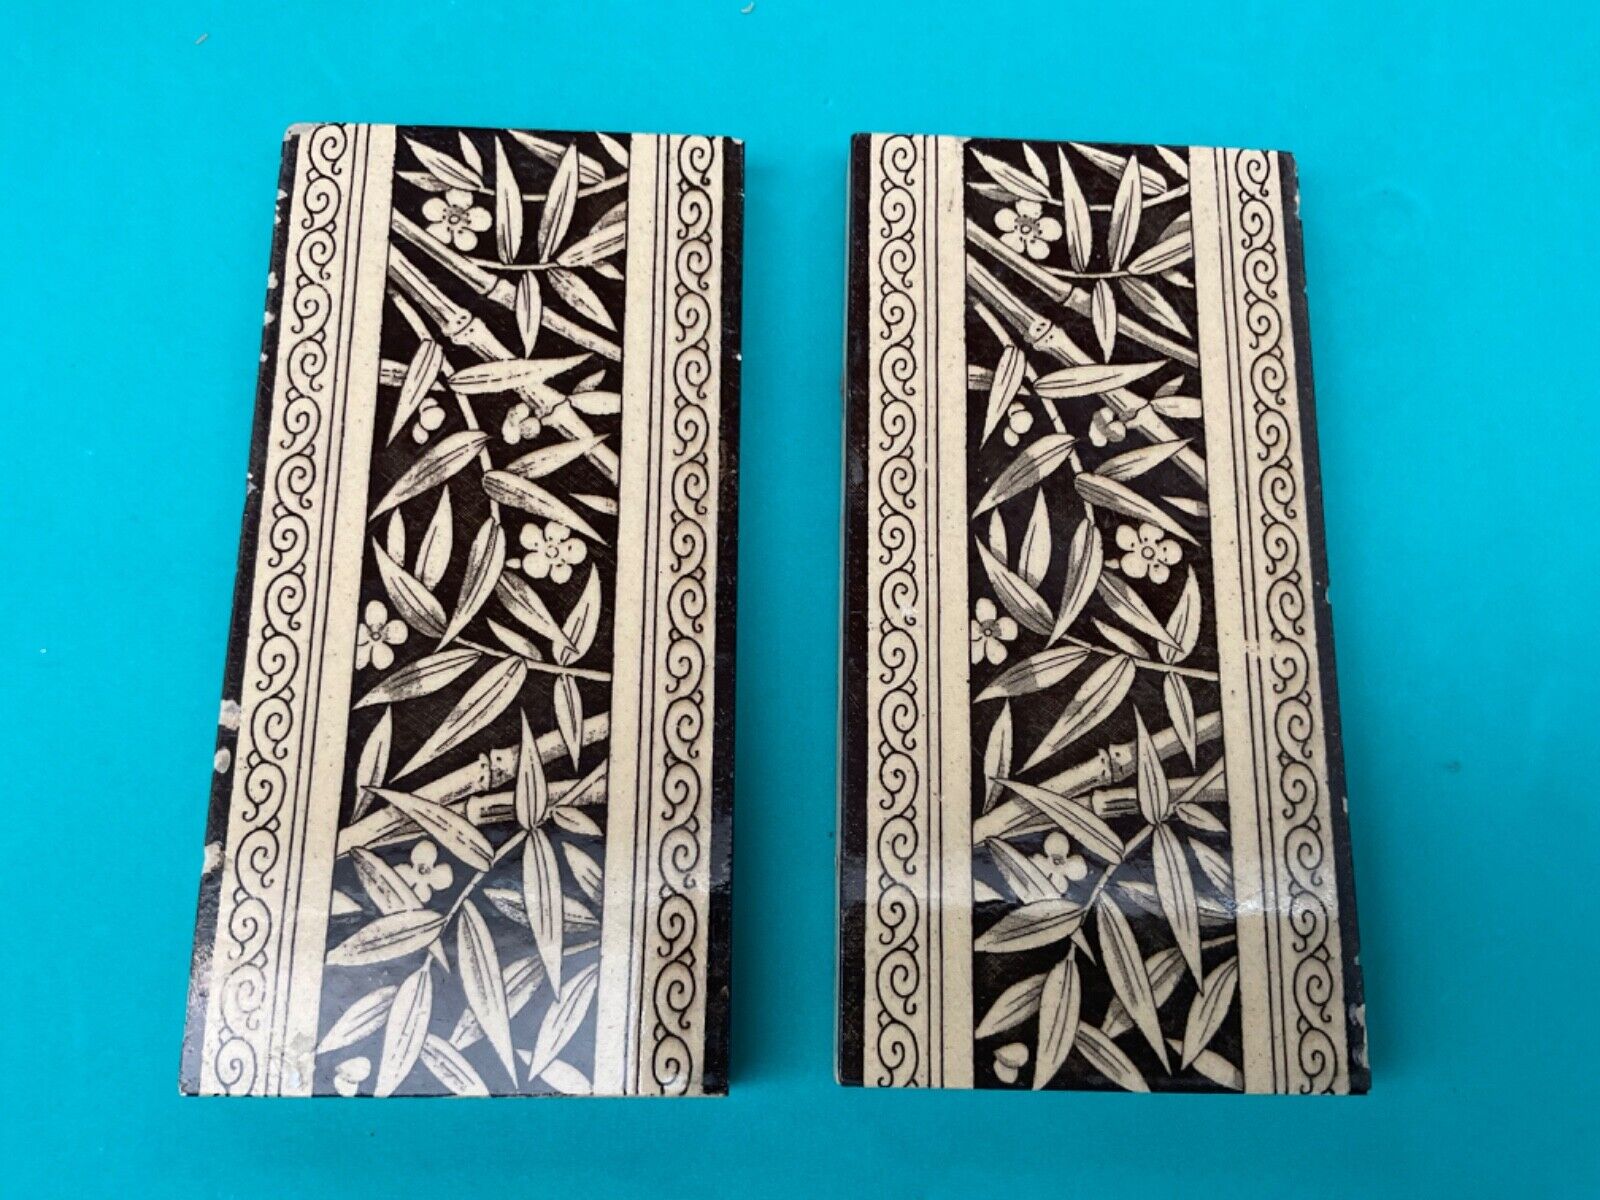 Pair of 1880s Ceramic Tiles - Aesthetic Movement- 3” by 6”